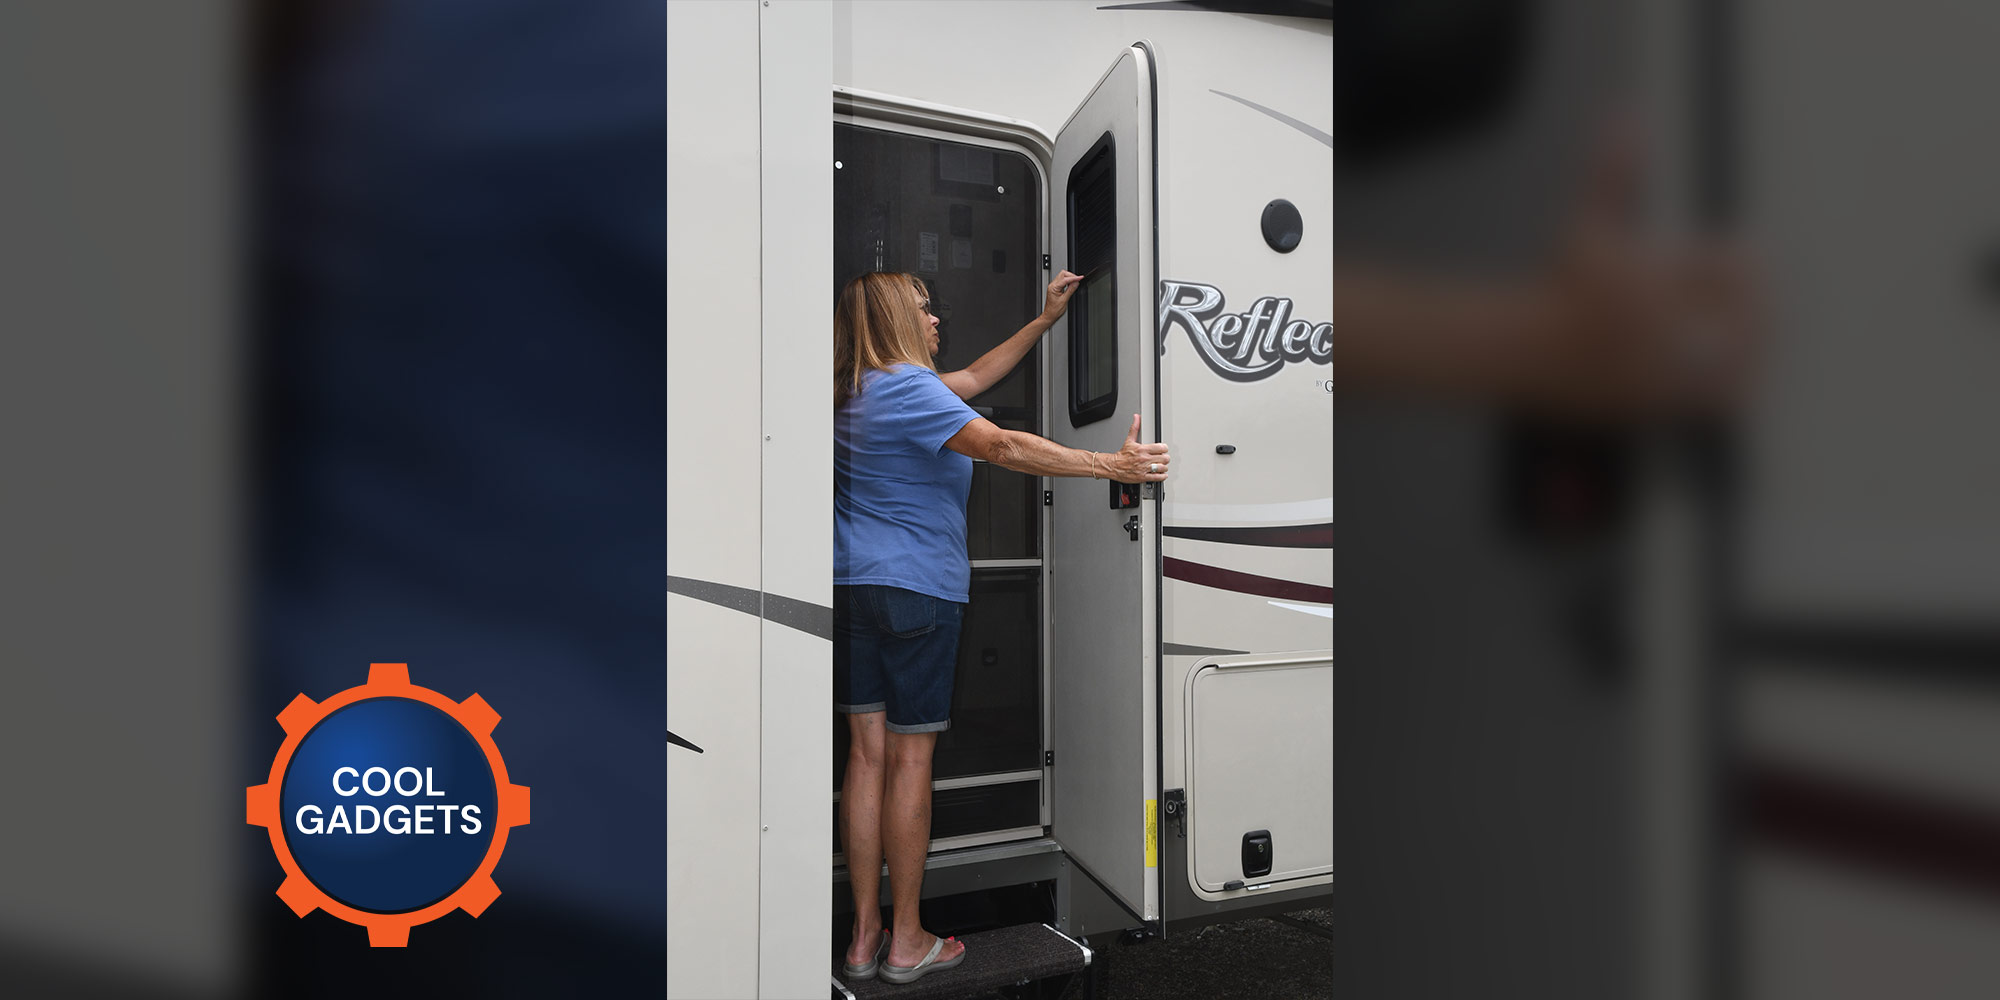 Privacy Matters featured image of an RV door